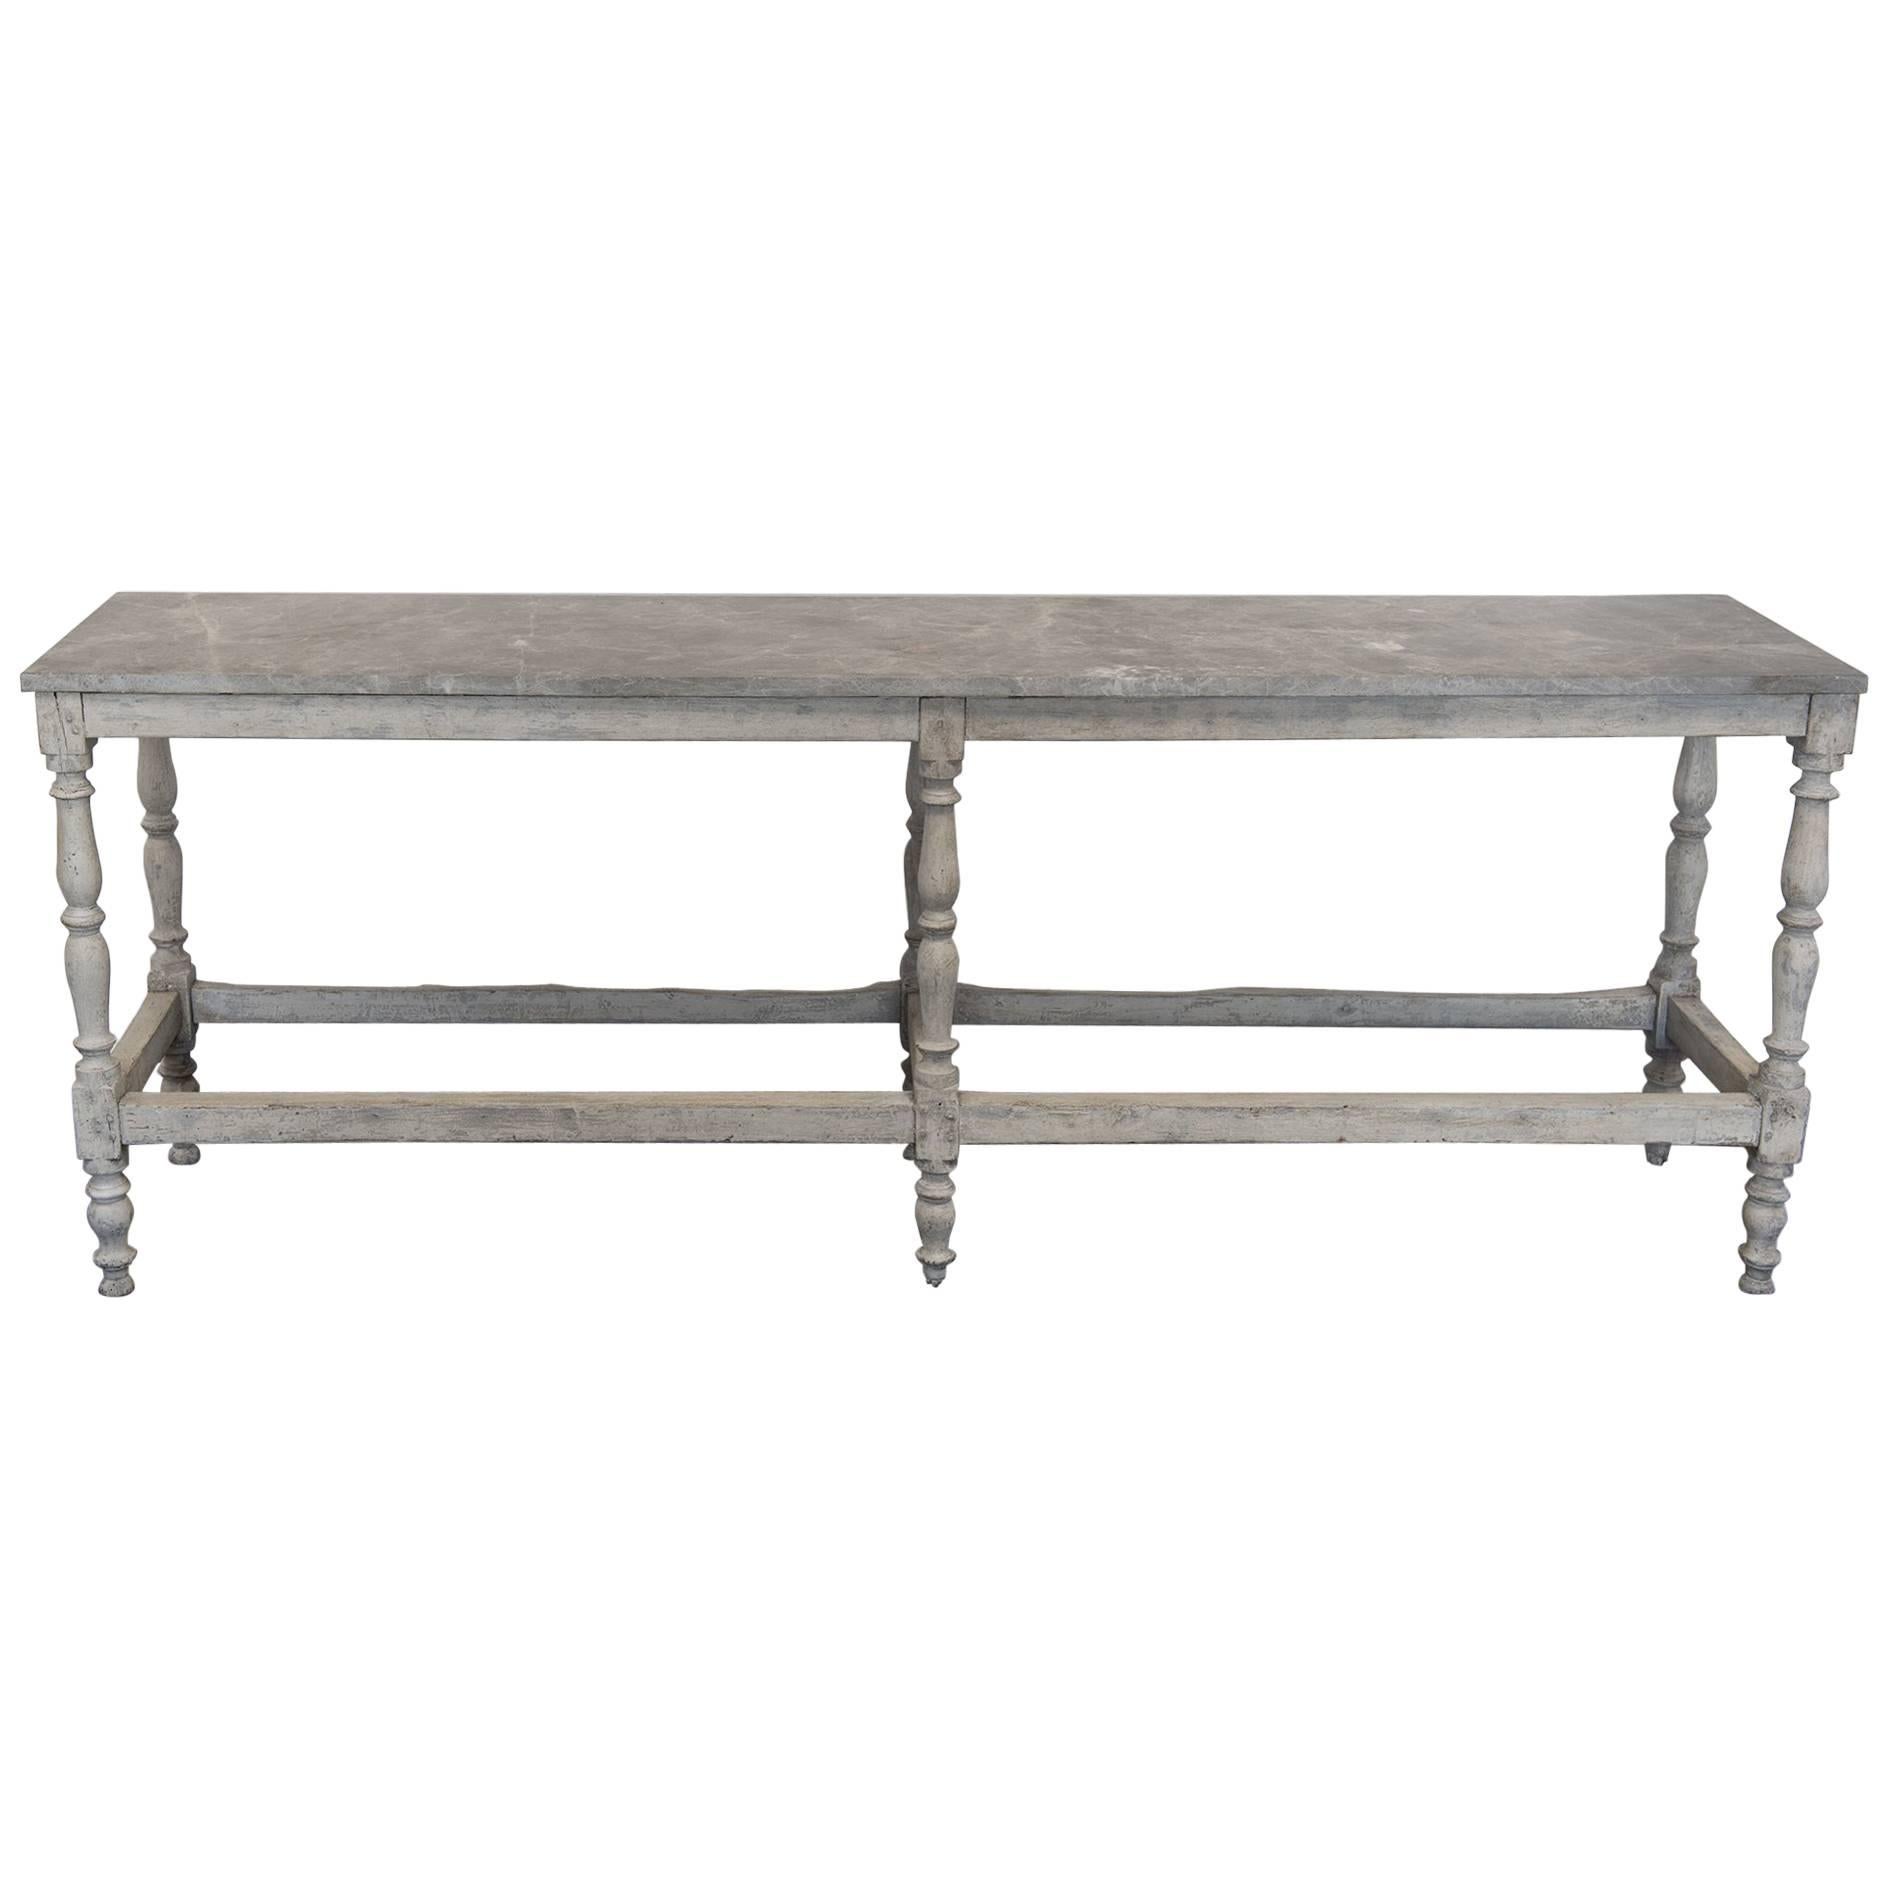 Long Wooden Table with Marble Top